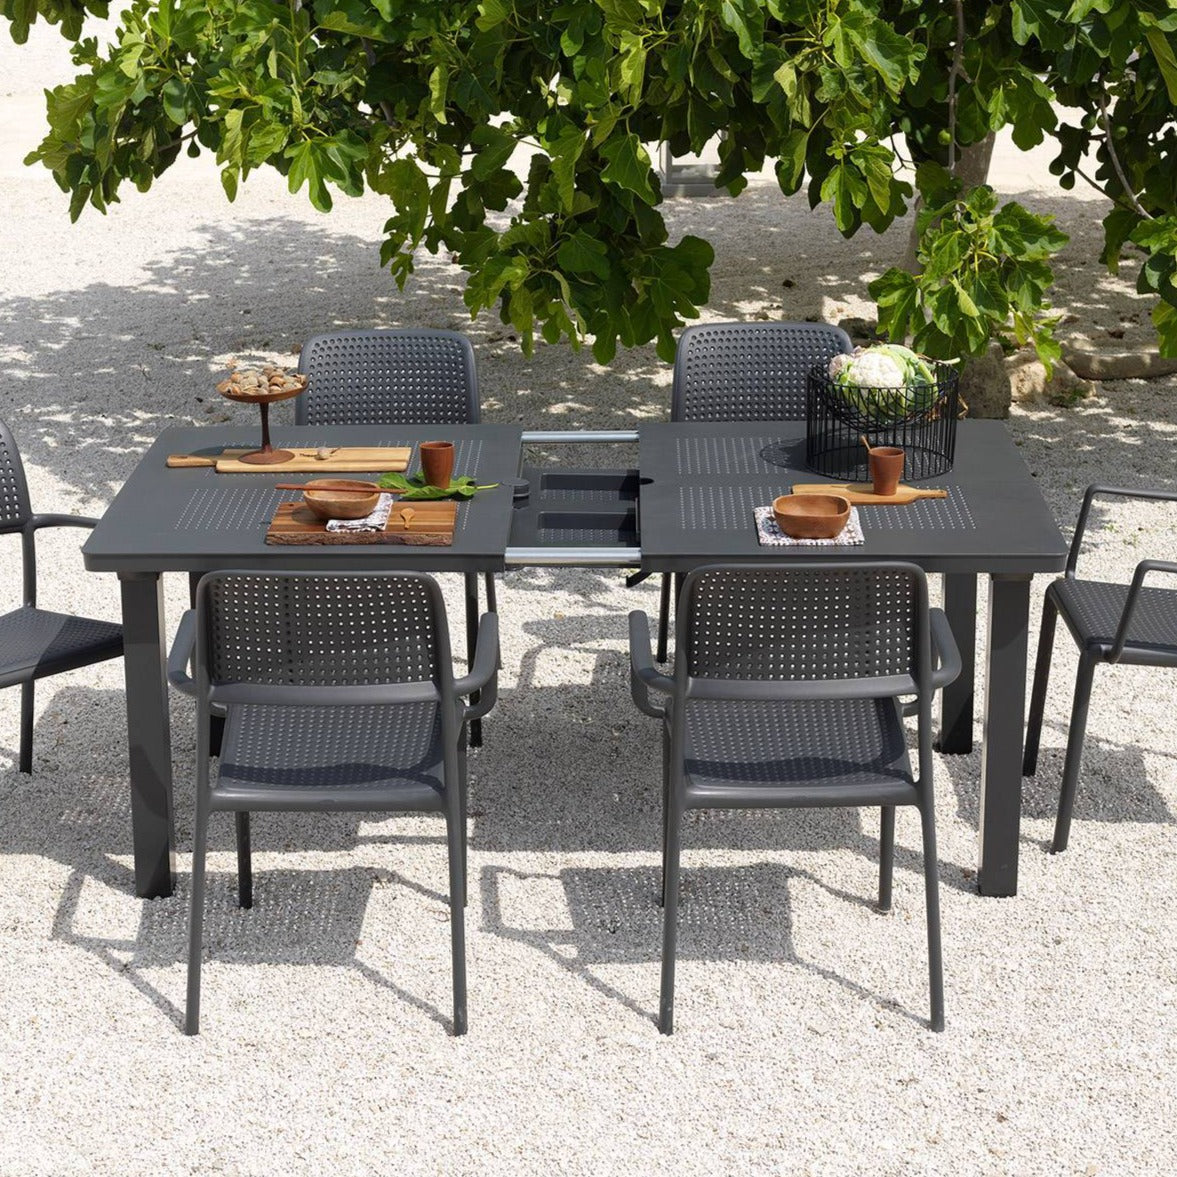 NARDI LEVANTE 6-8 Seater Dining Set with BORA chairs